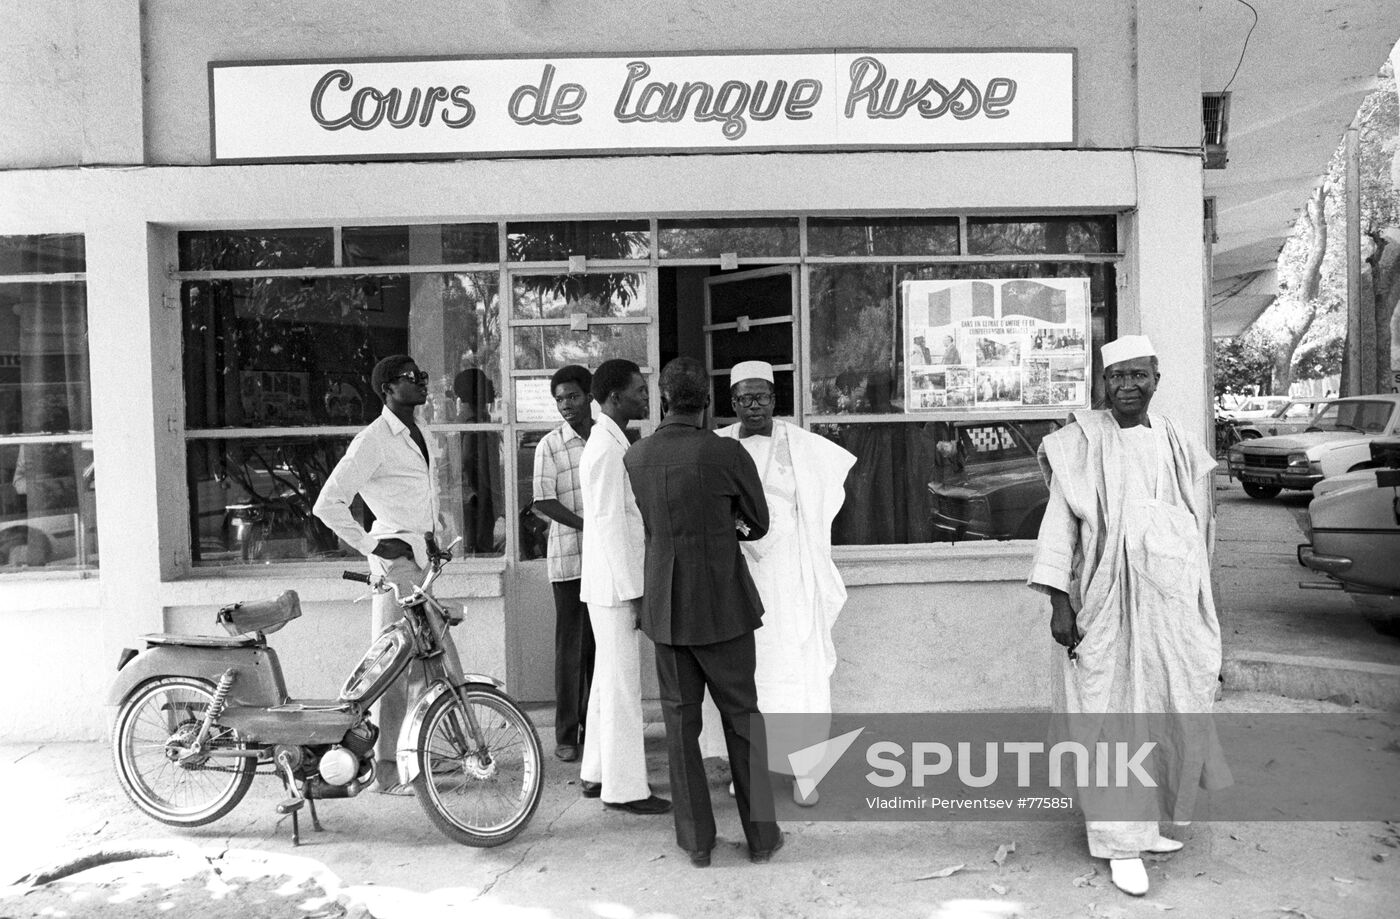 Courses of Russian in a Malian town